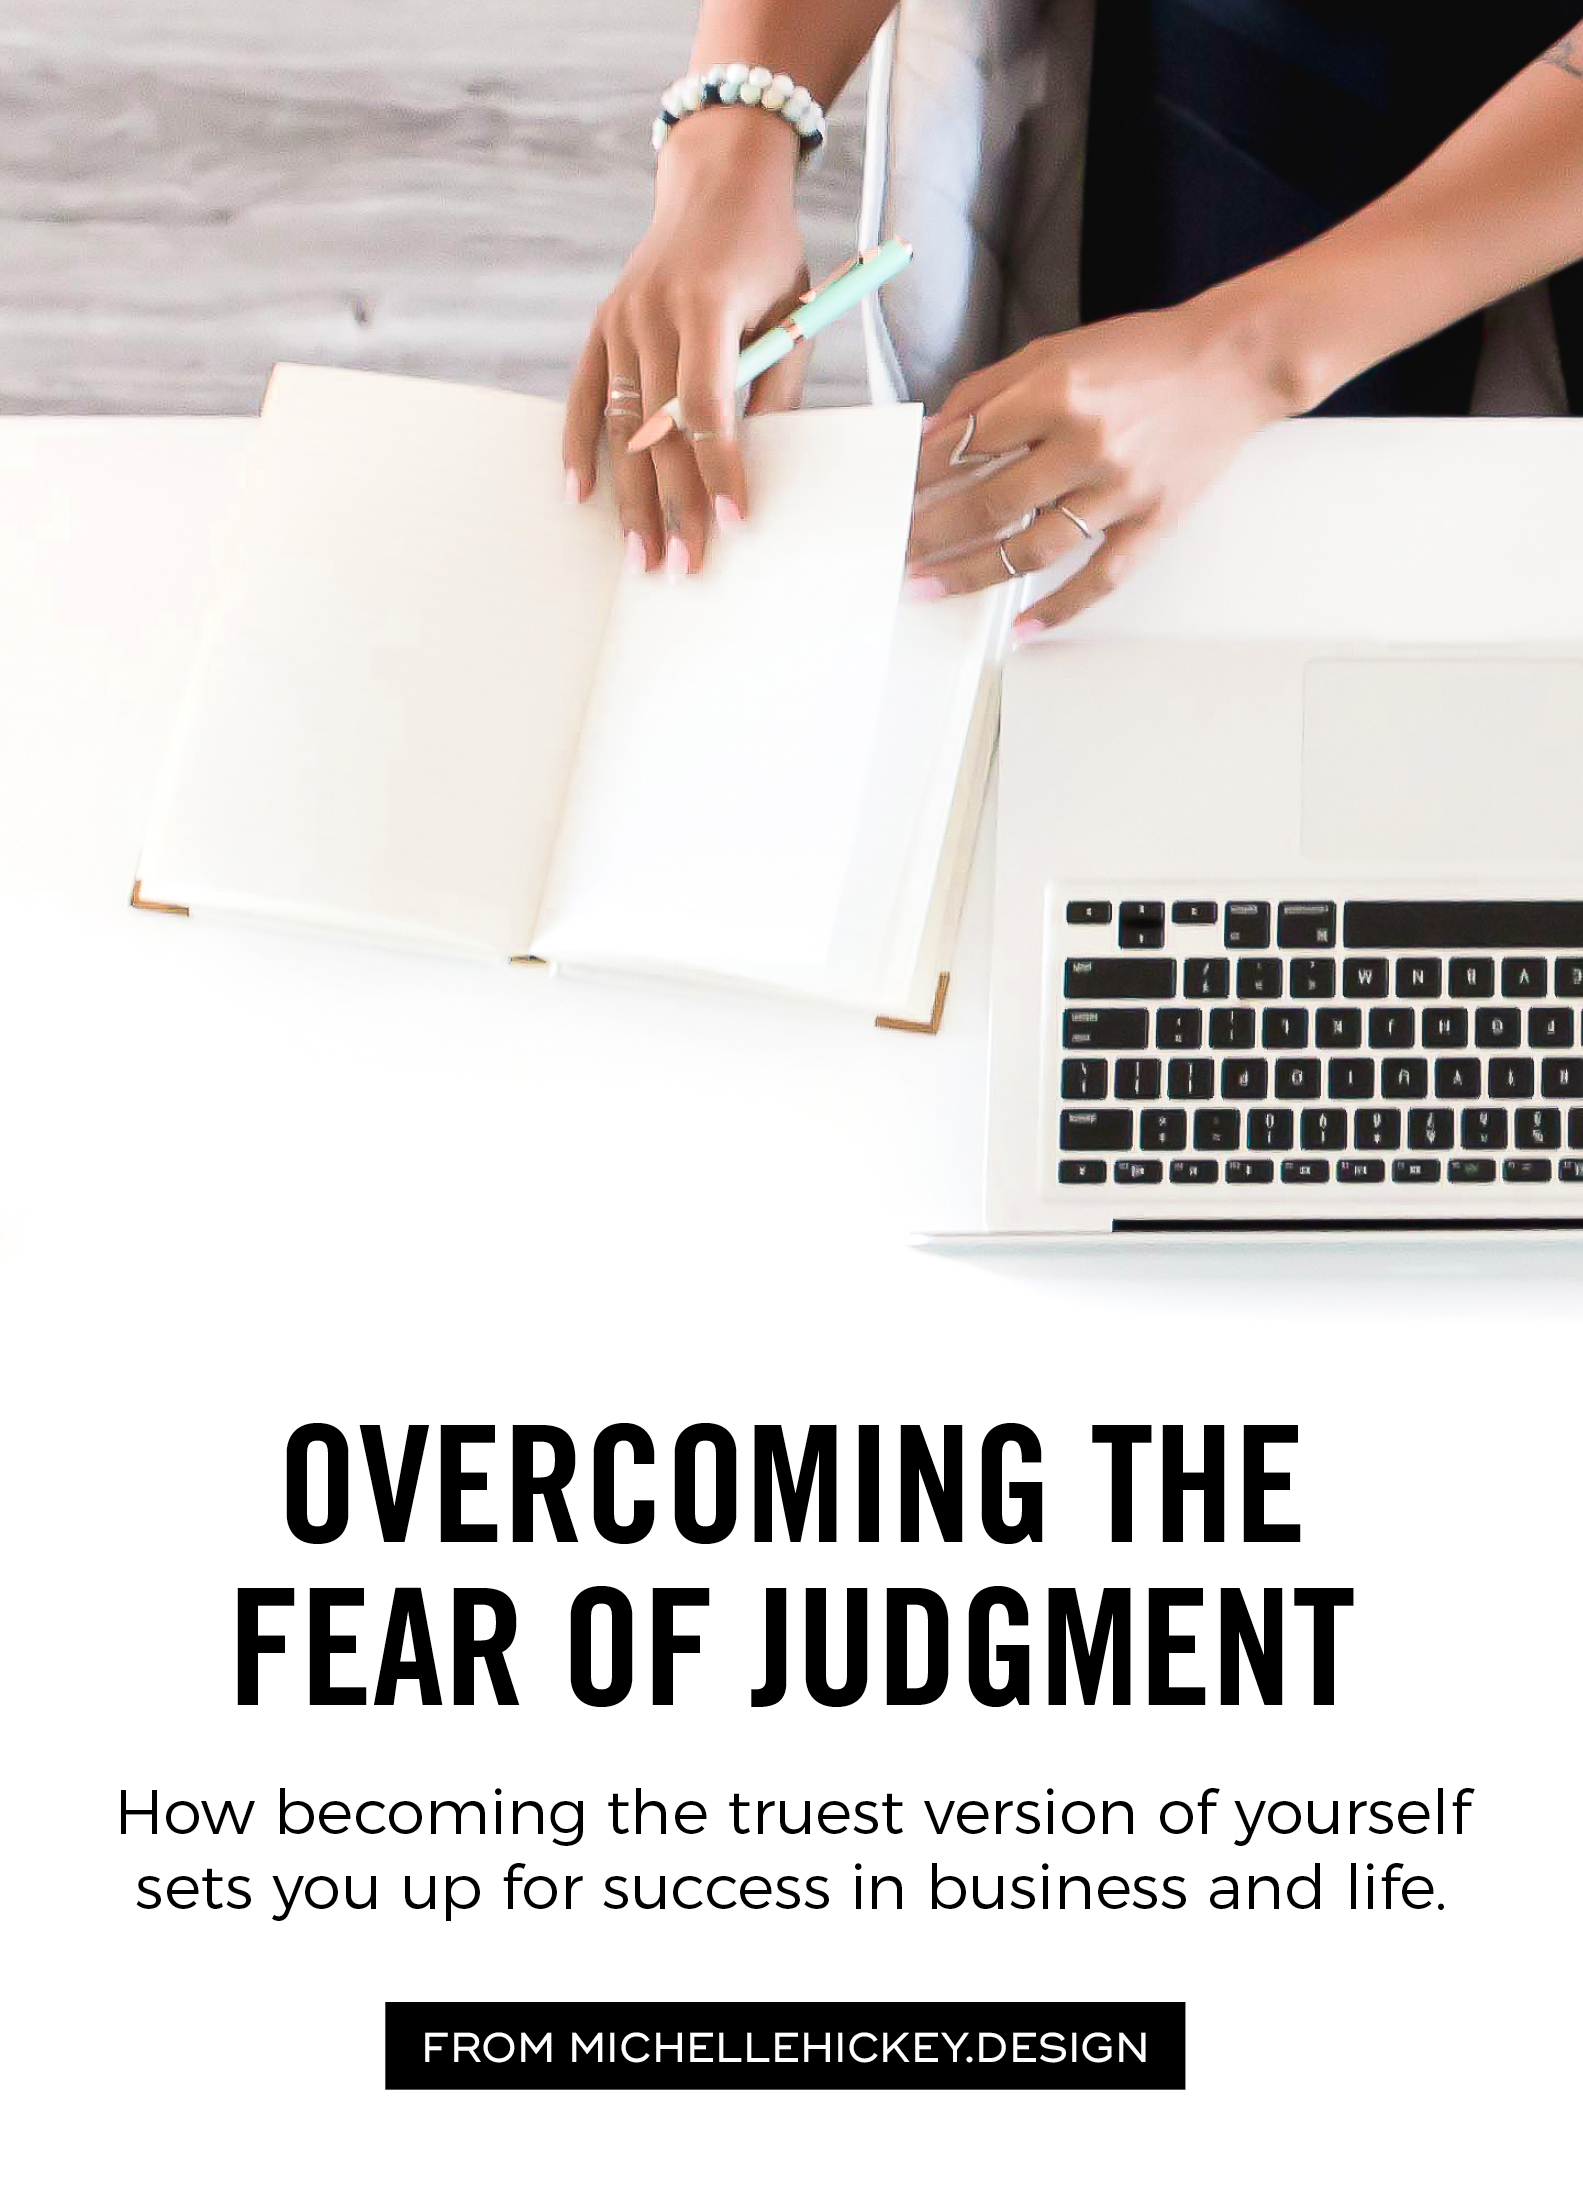 Do you let the fear of judgment from others stop you from pursuing the things you want most in life? In this post, you'll learn how to become brave enough to become the truest version of yourself. Includes a video + a free 4-step guide. // From Michelle Hickey Design